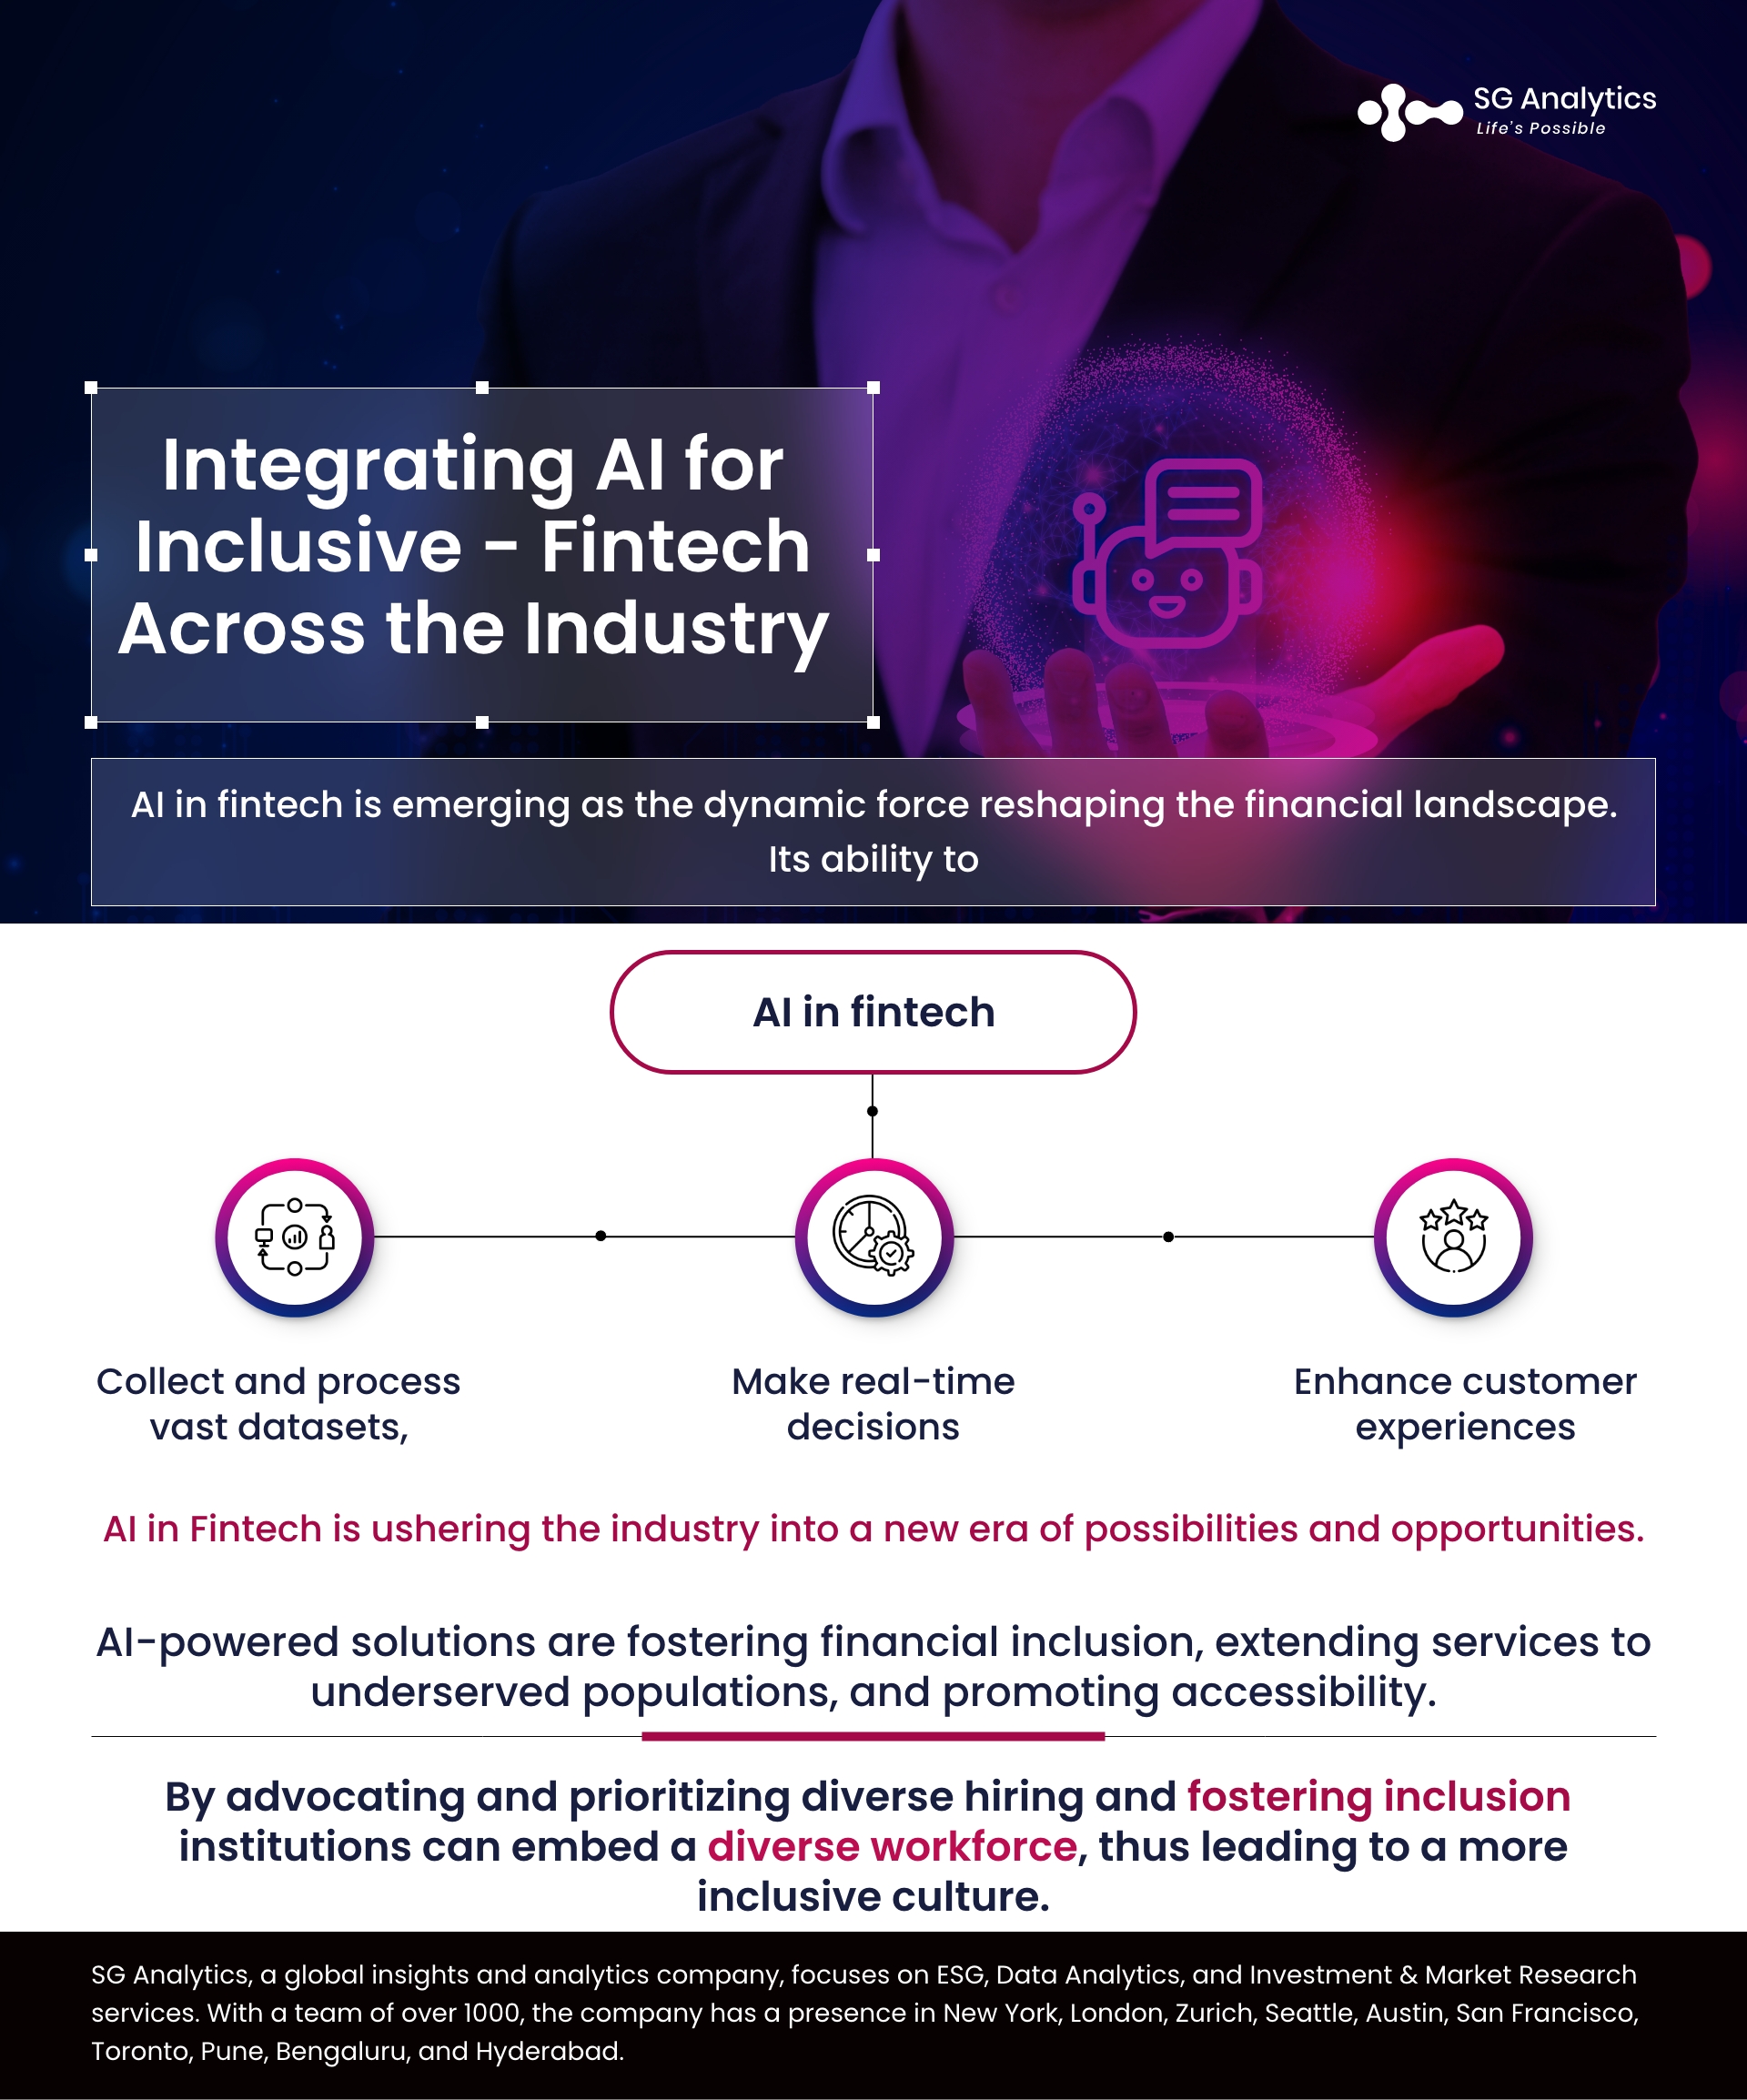 Integrating AI for Inclusive Fintech Across the Industry